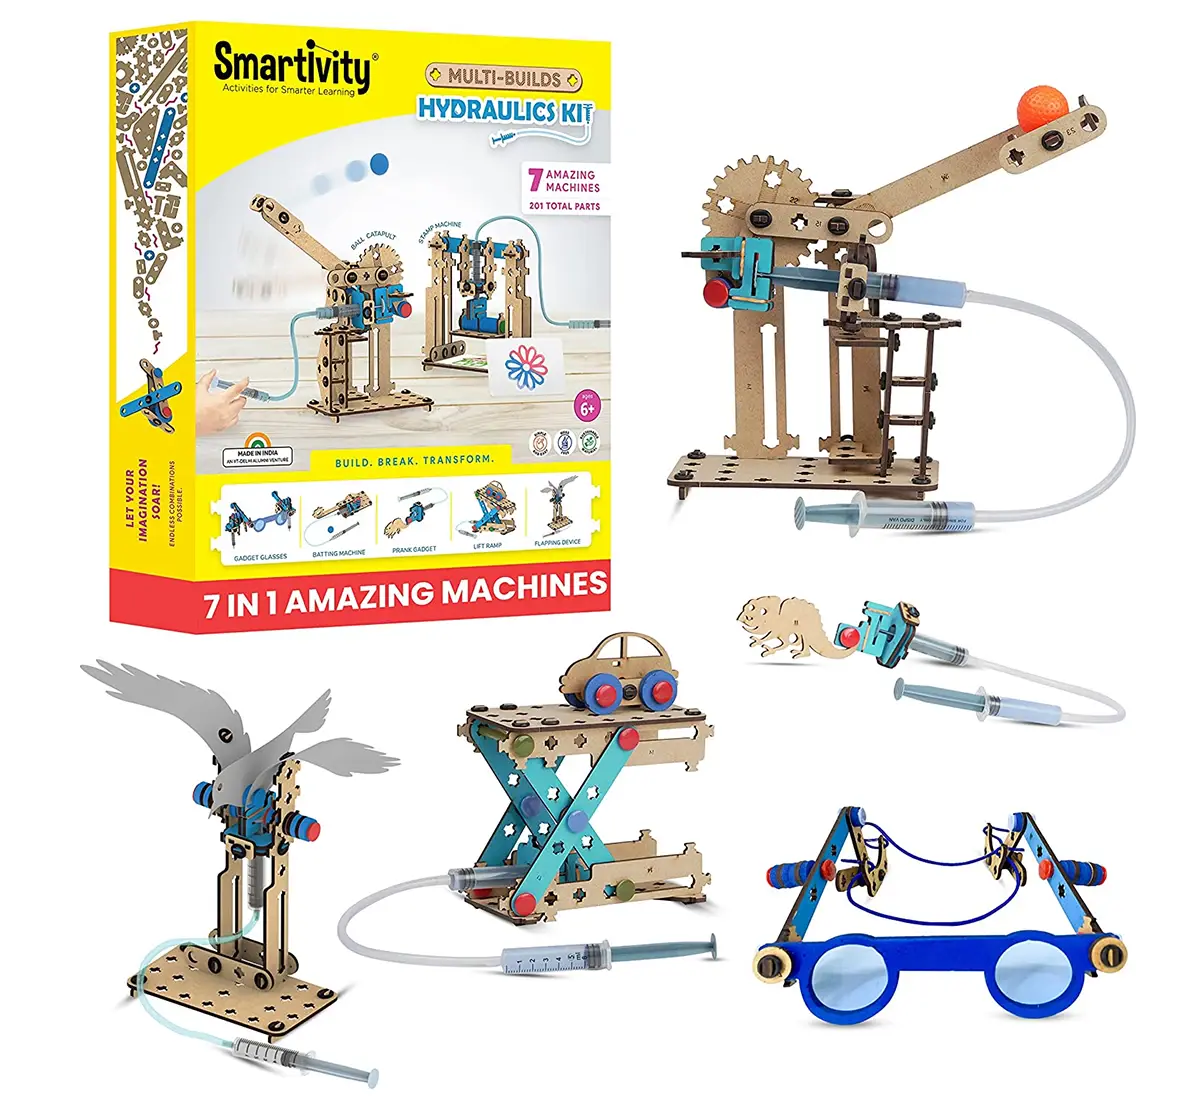 Smartivity 7 in 1 Multi-Builds Hydraulic Kit STEM DIY Fun Toy for Kids 6 to 12yrs